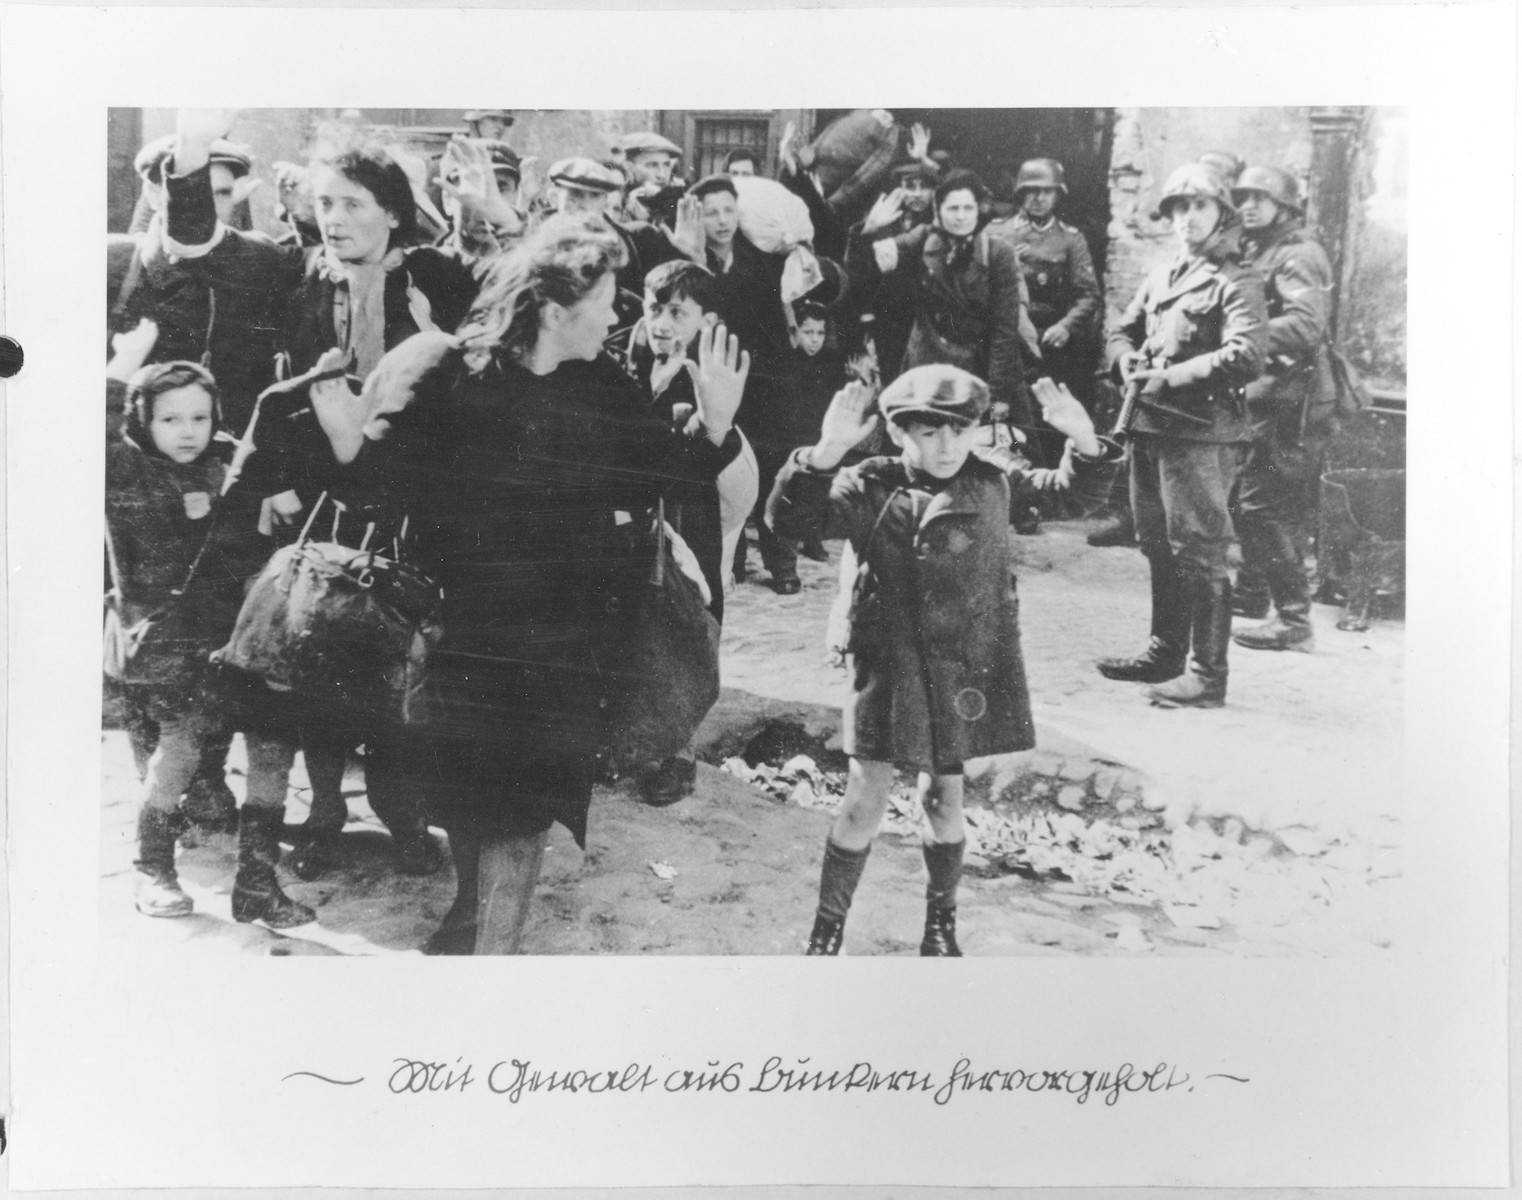 Jews captured by SS and SD troops during the suppression of the Warsaw ghetto uprising are forced to leave their shelter and march to the Umschlagplatz for deportation.  

The original German caption reads: "Pulled from the bunkers by force."

The SD trooper pictured second from the right, is SS-Rottenfuehrer Josef Bloesche, who was identified by authorities using this photograph.  Bloesche was tried for war crimes by an East German court in 1969, sentenced to death and executed in July of that year.  

The little girl on the left has been identified as Hanka Lamet, who is standing next to her mother, Matylda Lamet Goldfinger (the woman second from the left).  The boy carrying the sack has been identified as Leo Kartuzinsky and the woman in the front has been identified as Chana Zeilinwarger.  Numerous people have identified the boy in the foreground as either Arthur Domb Semiontek, Issrael Rondel, Tsvi Nussbaum or Levi Zeilinwarger, but none of these identifications can be conclusively corroborated